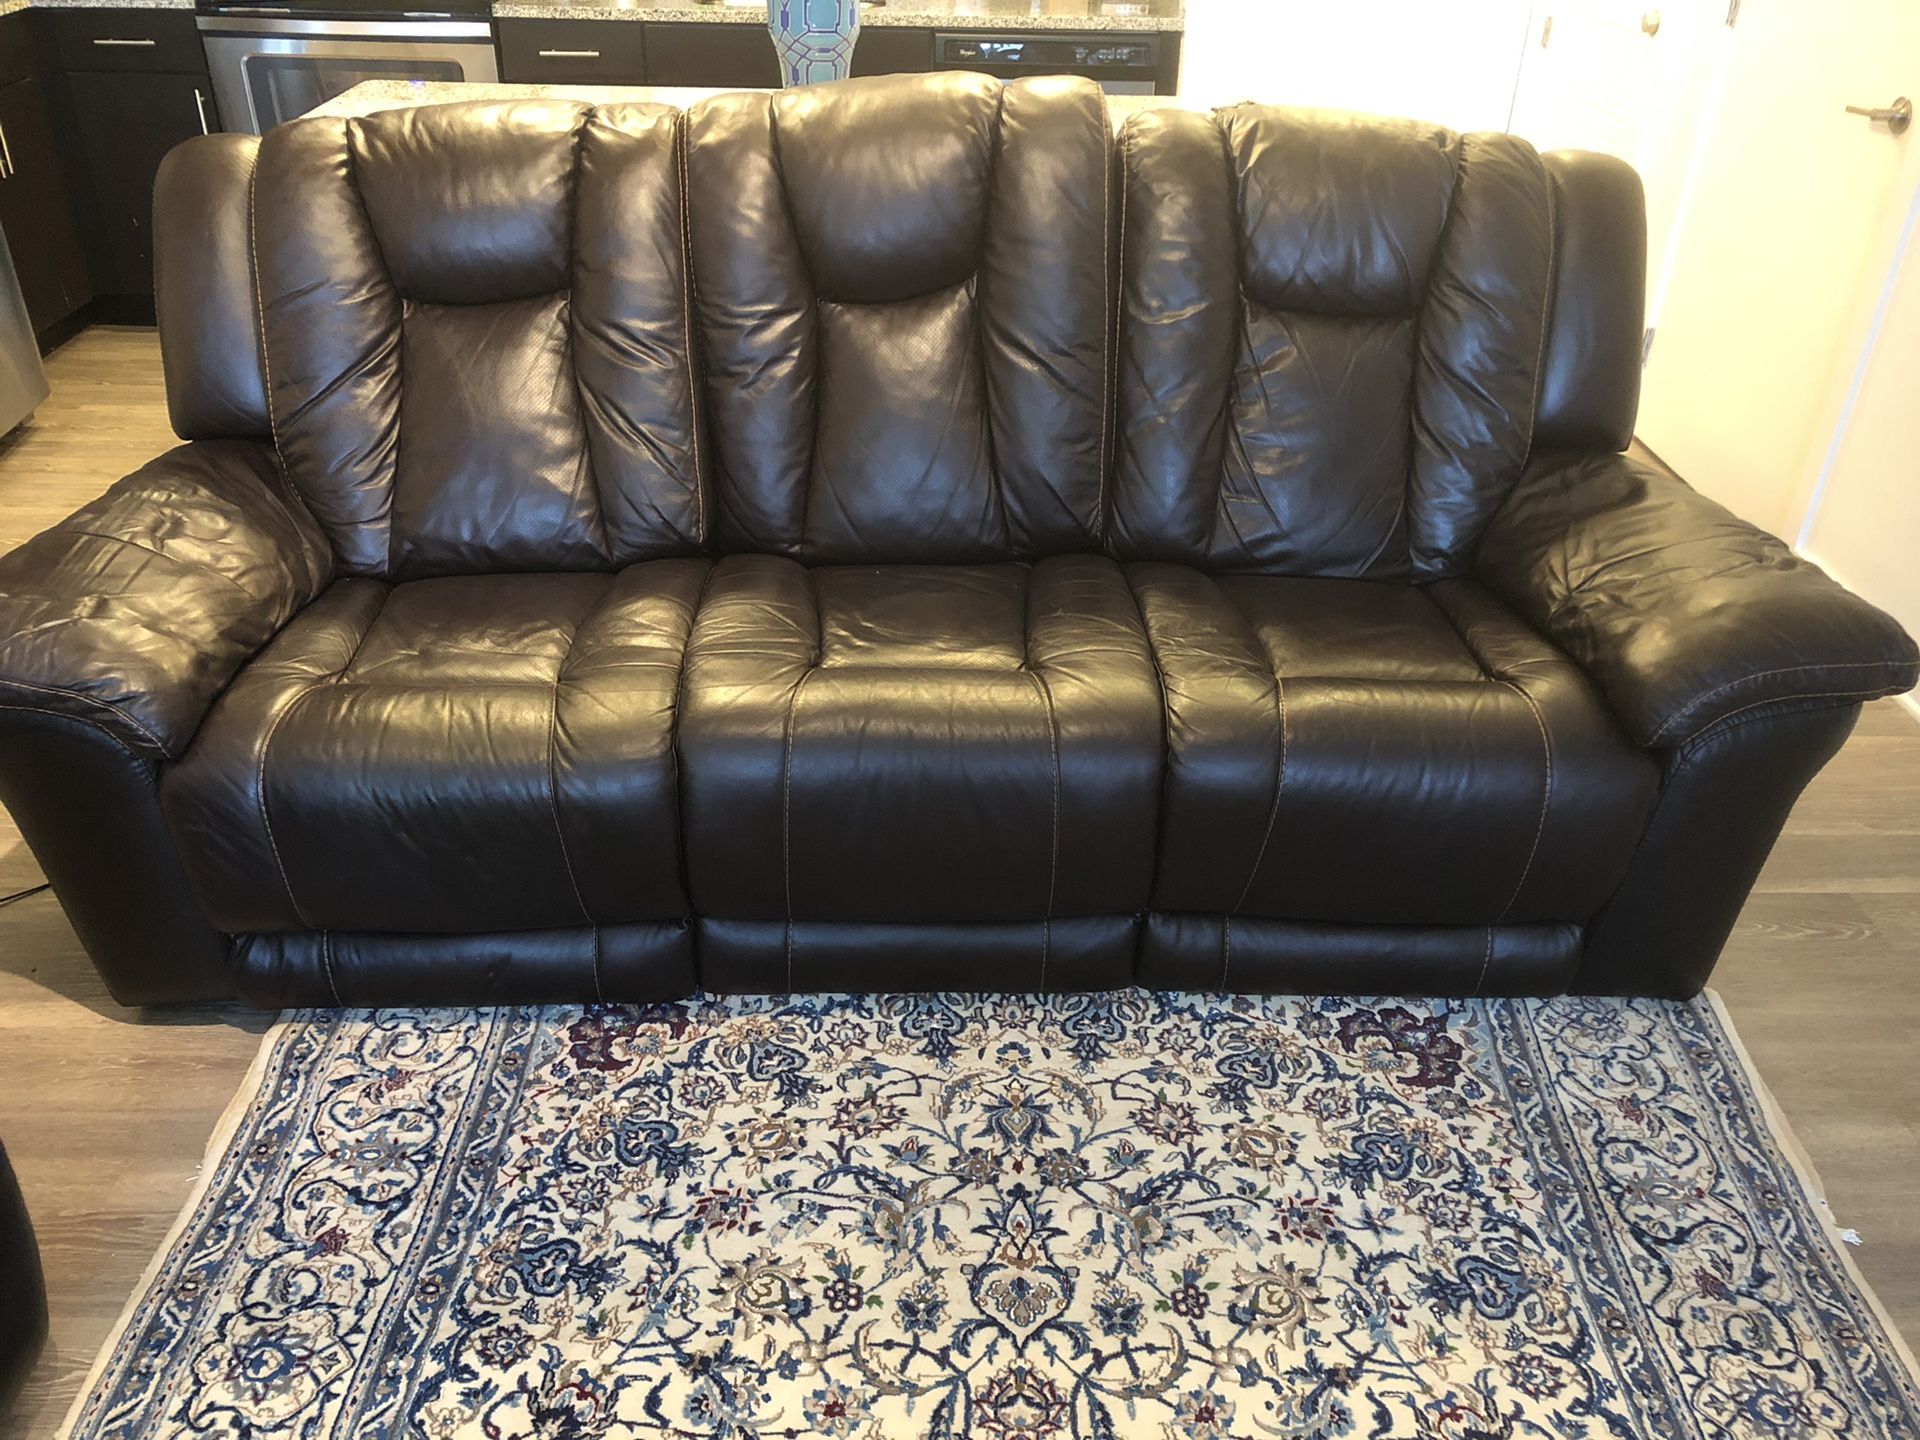 Geniune leather recliner/ dark brown/ pets free smoke free home/ in great condition